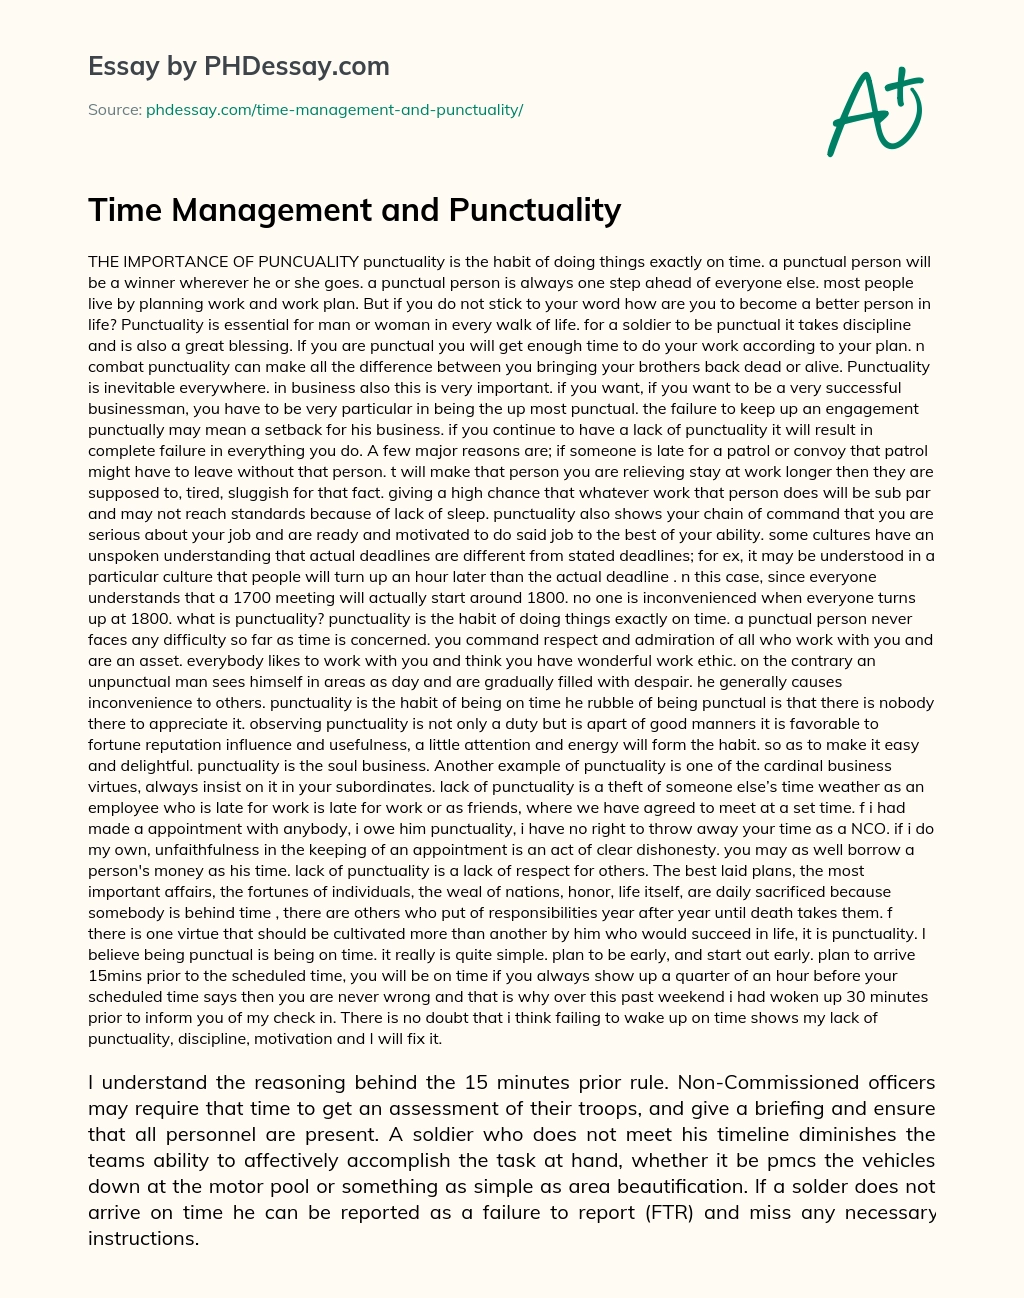 Time Management and Punctuality essay